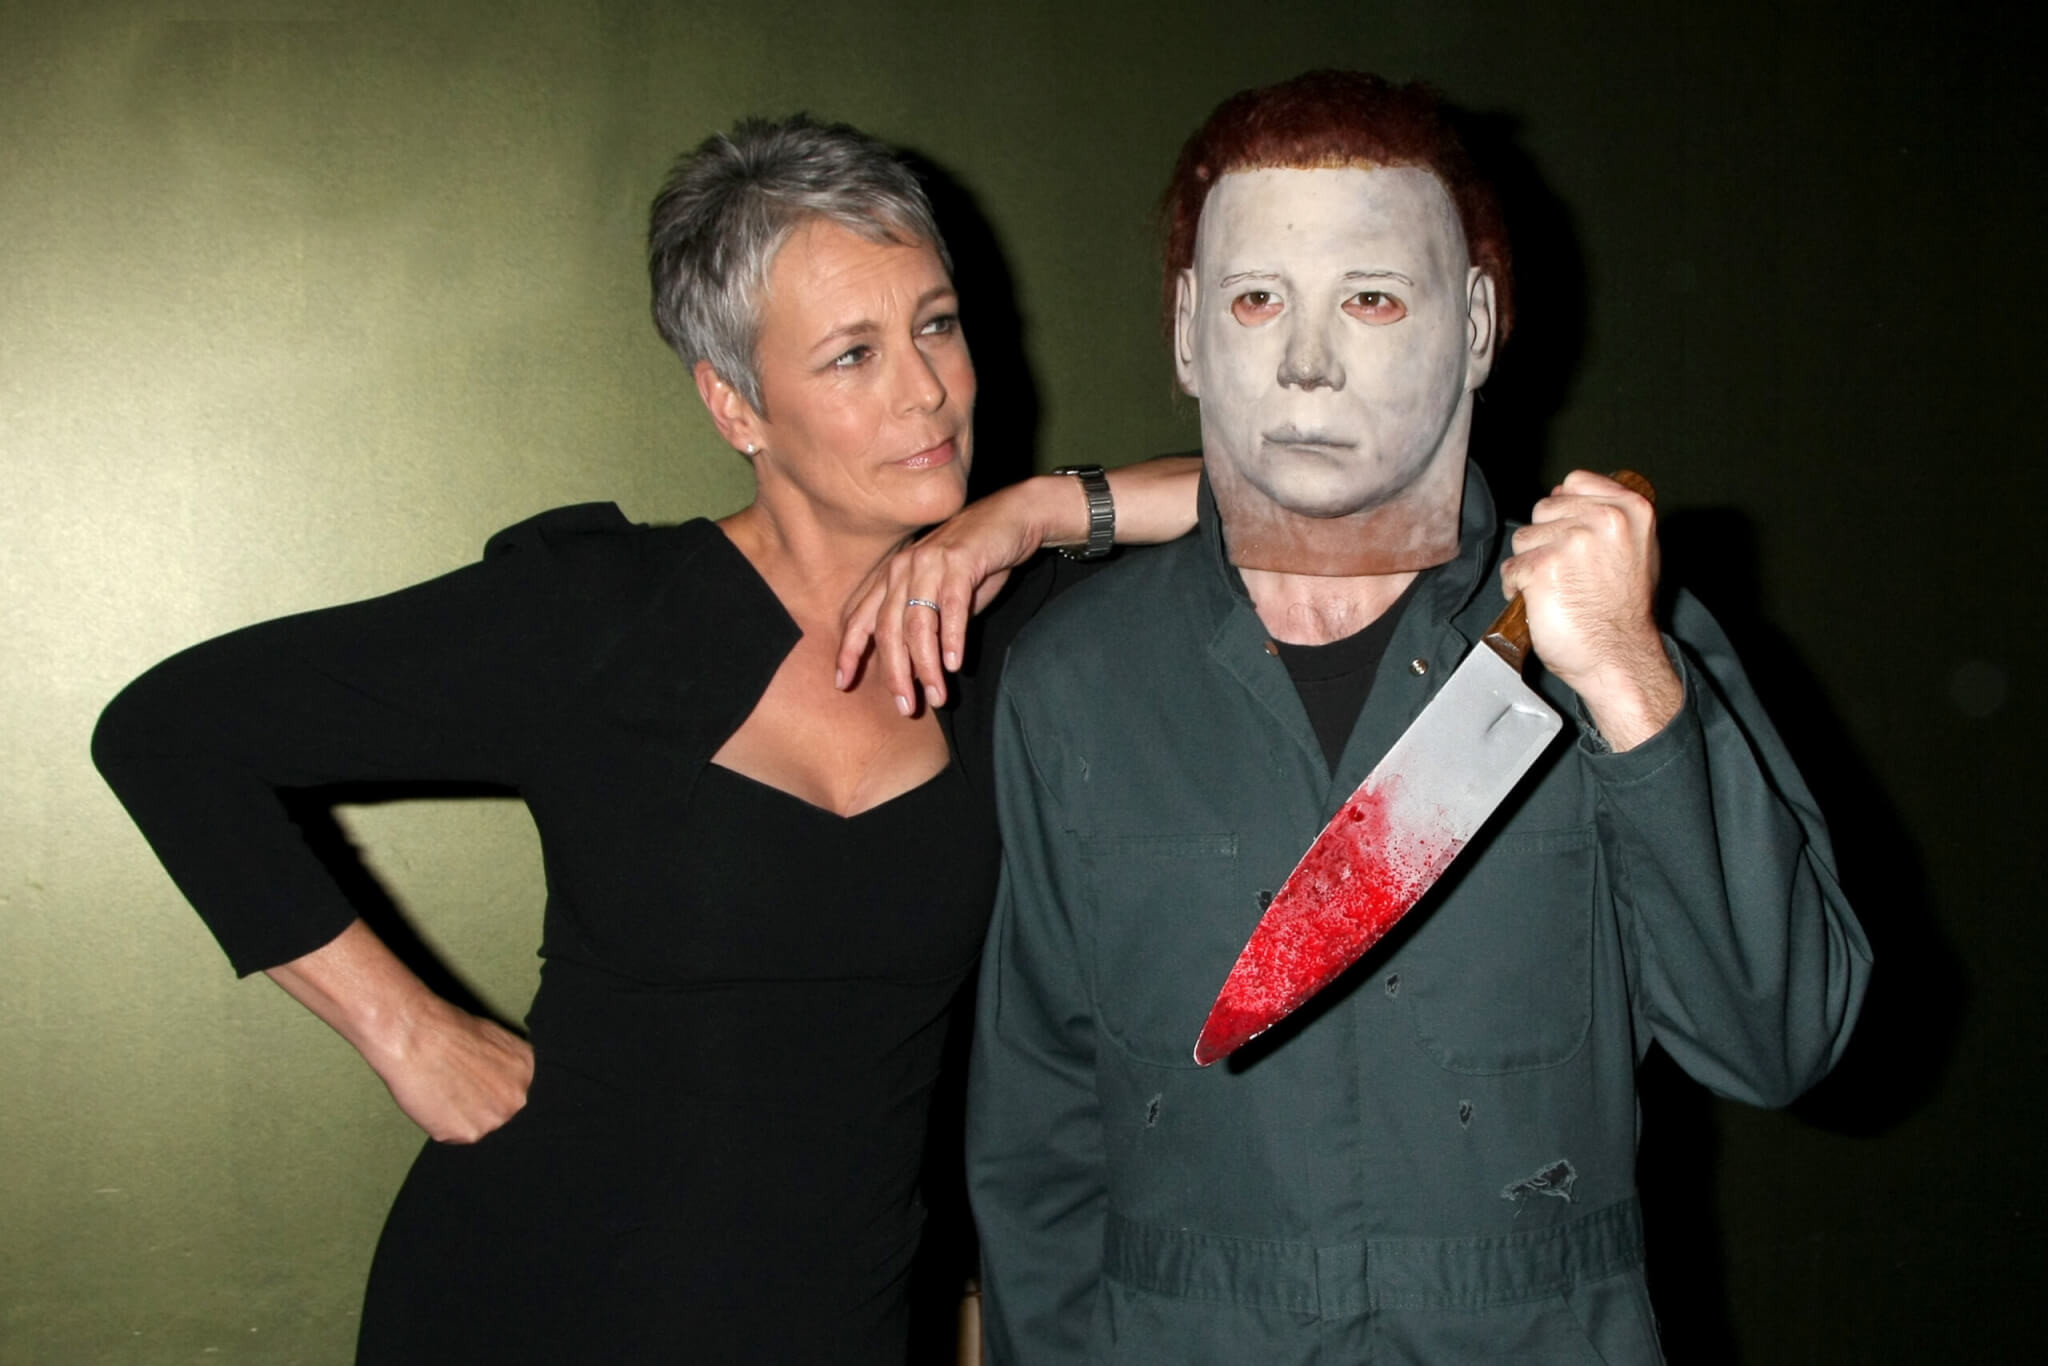 Jamie Lee Curtis & "Michael Myers" Costumed Guest at the sCare Foundation Benefit in 2011